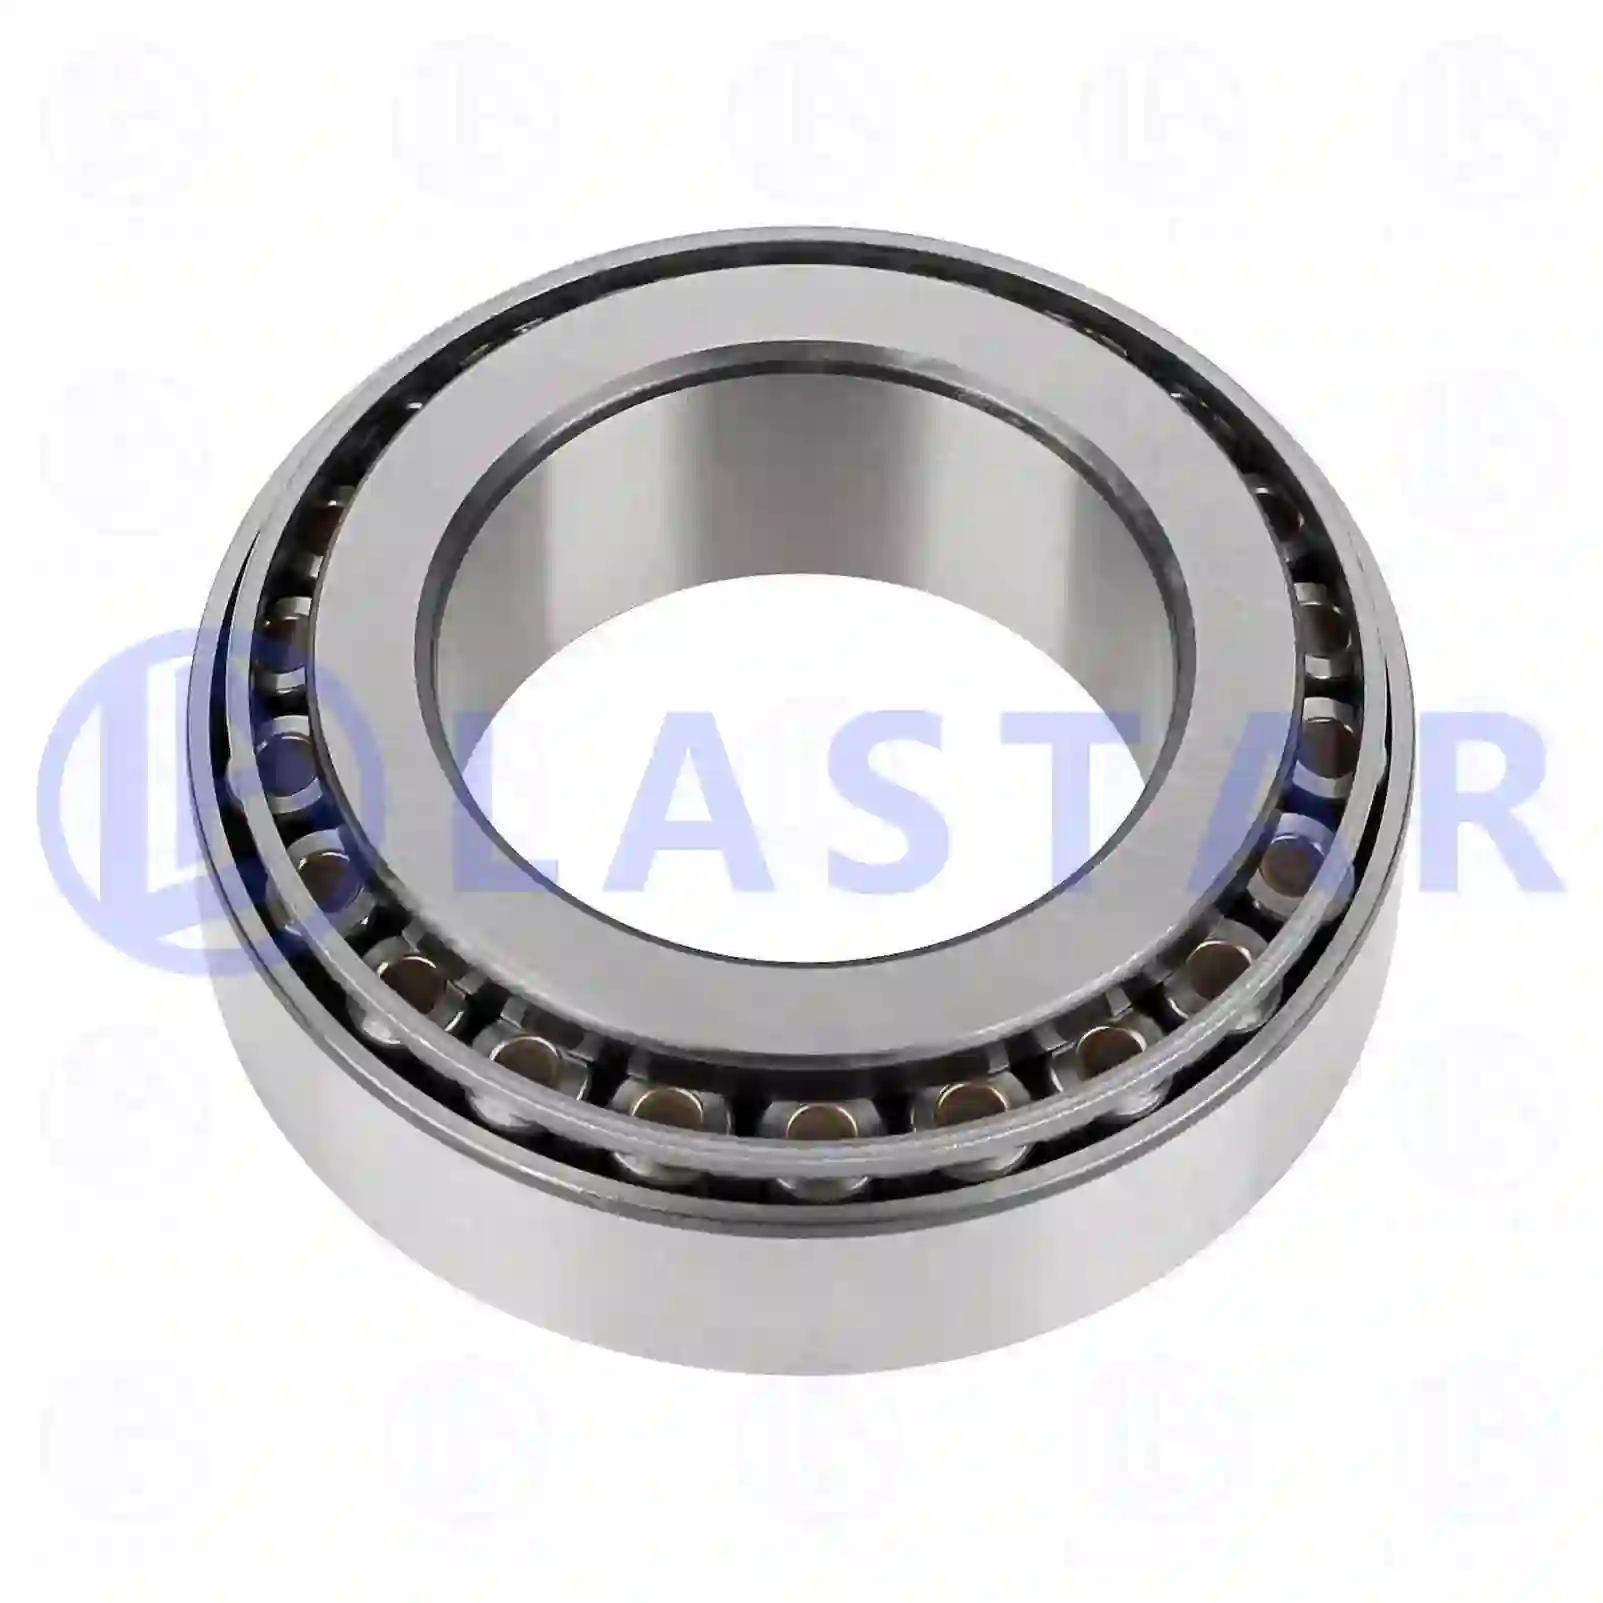 Bearings Tapered roller bearing, la no: 77725222 ,  oem no:4009814105, 005104044, 04690299, 04690299, 4690299, 06244990036, 06244990108, 06324990039, 06324990073, 06324990108, 06324990116, 81934206022, 87524700903, 0009814518, 0039814105, 0039818205, 0059814705, 0069818805, 4200005500, 183694 Lastar Spare Part | Truck Spare Parts, Auotomotive Spare Parts